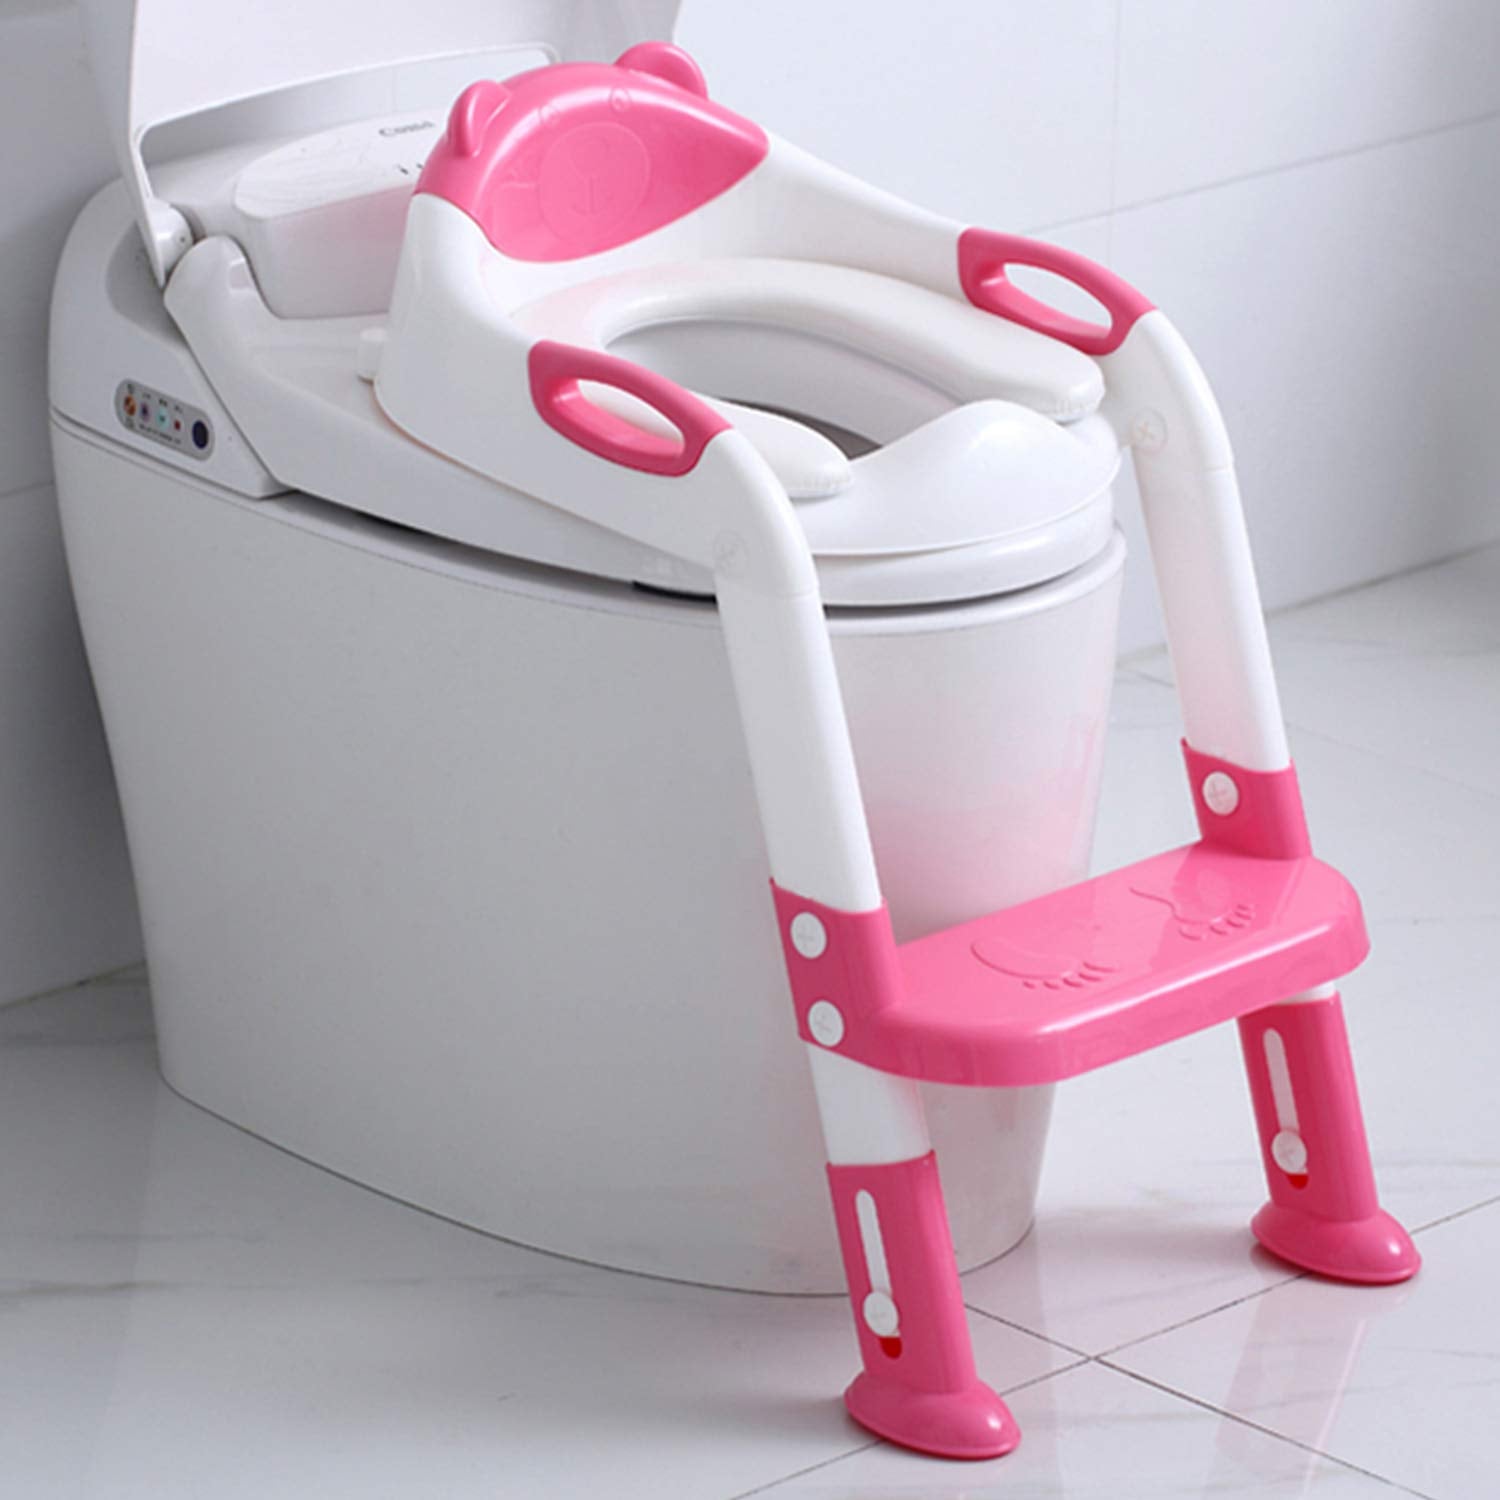 2-in-1 Potty Training Toilet Seat for kids - Toddler Potty Chair with Step Stool Ladder